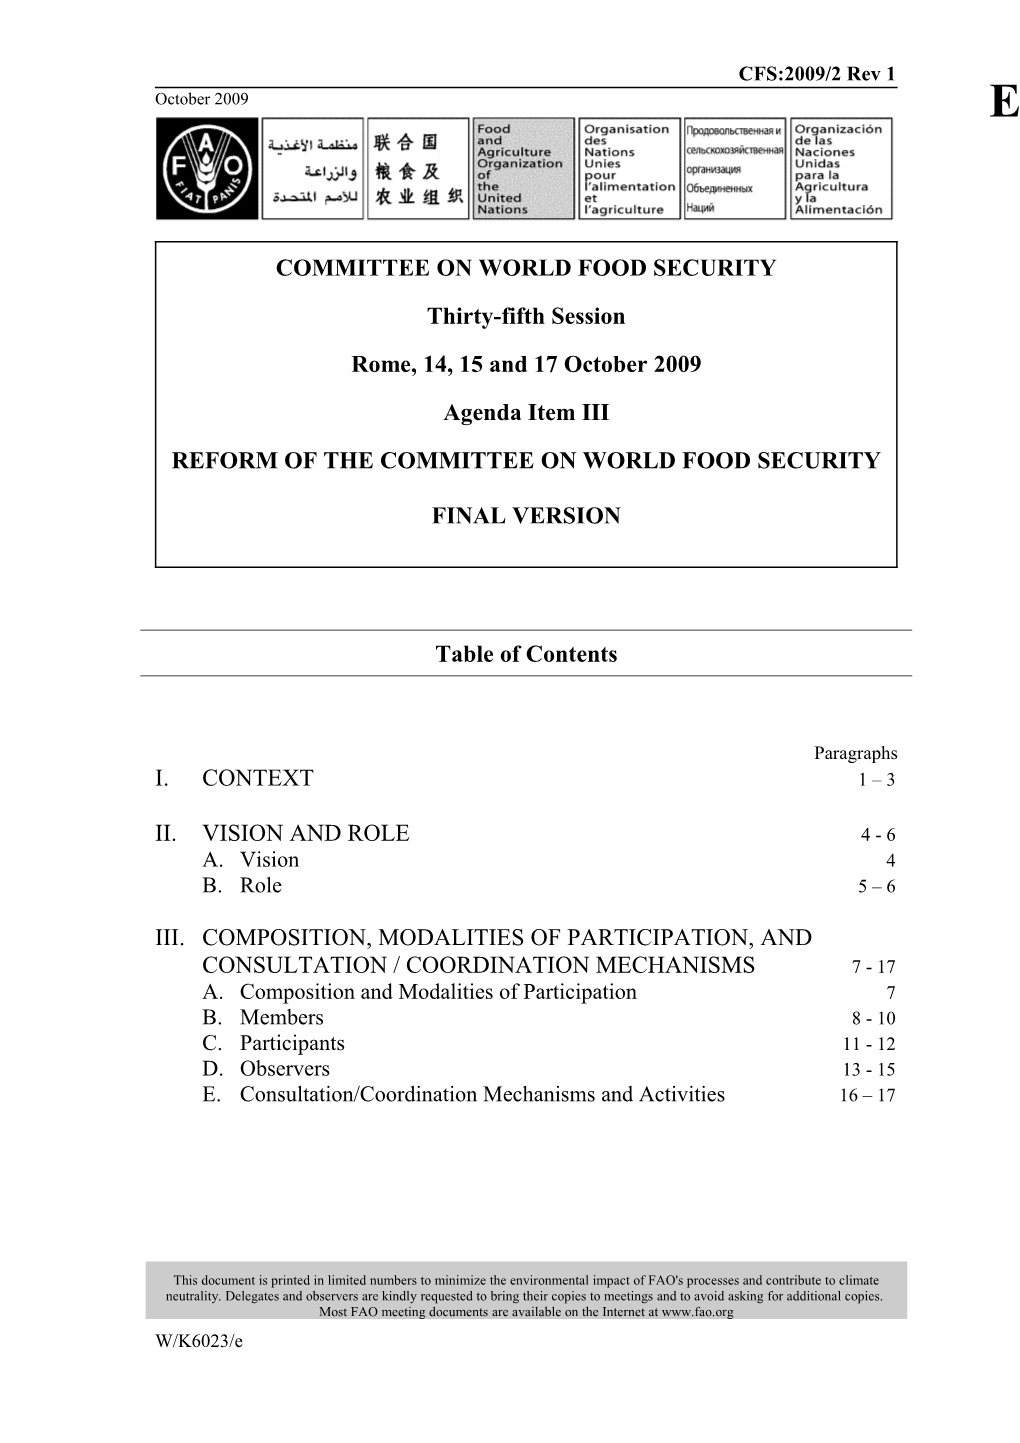 Committee on World Food Security